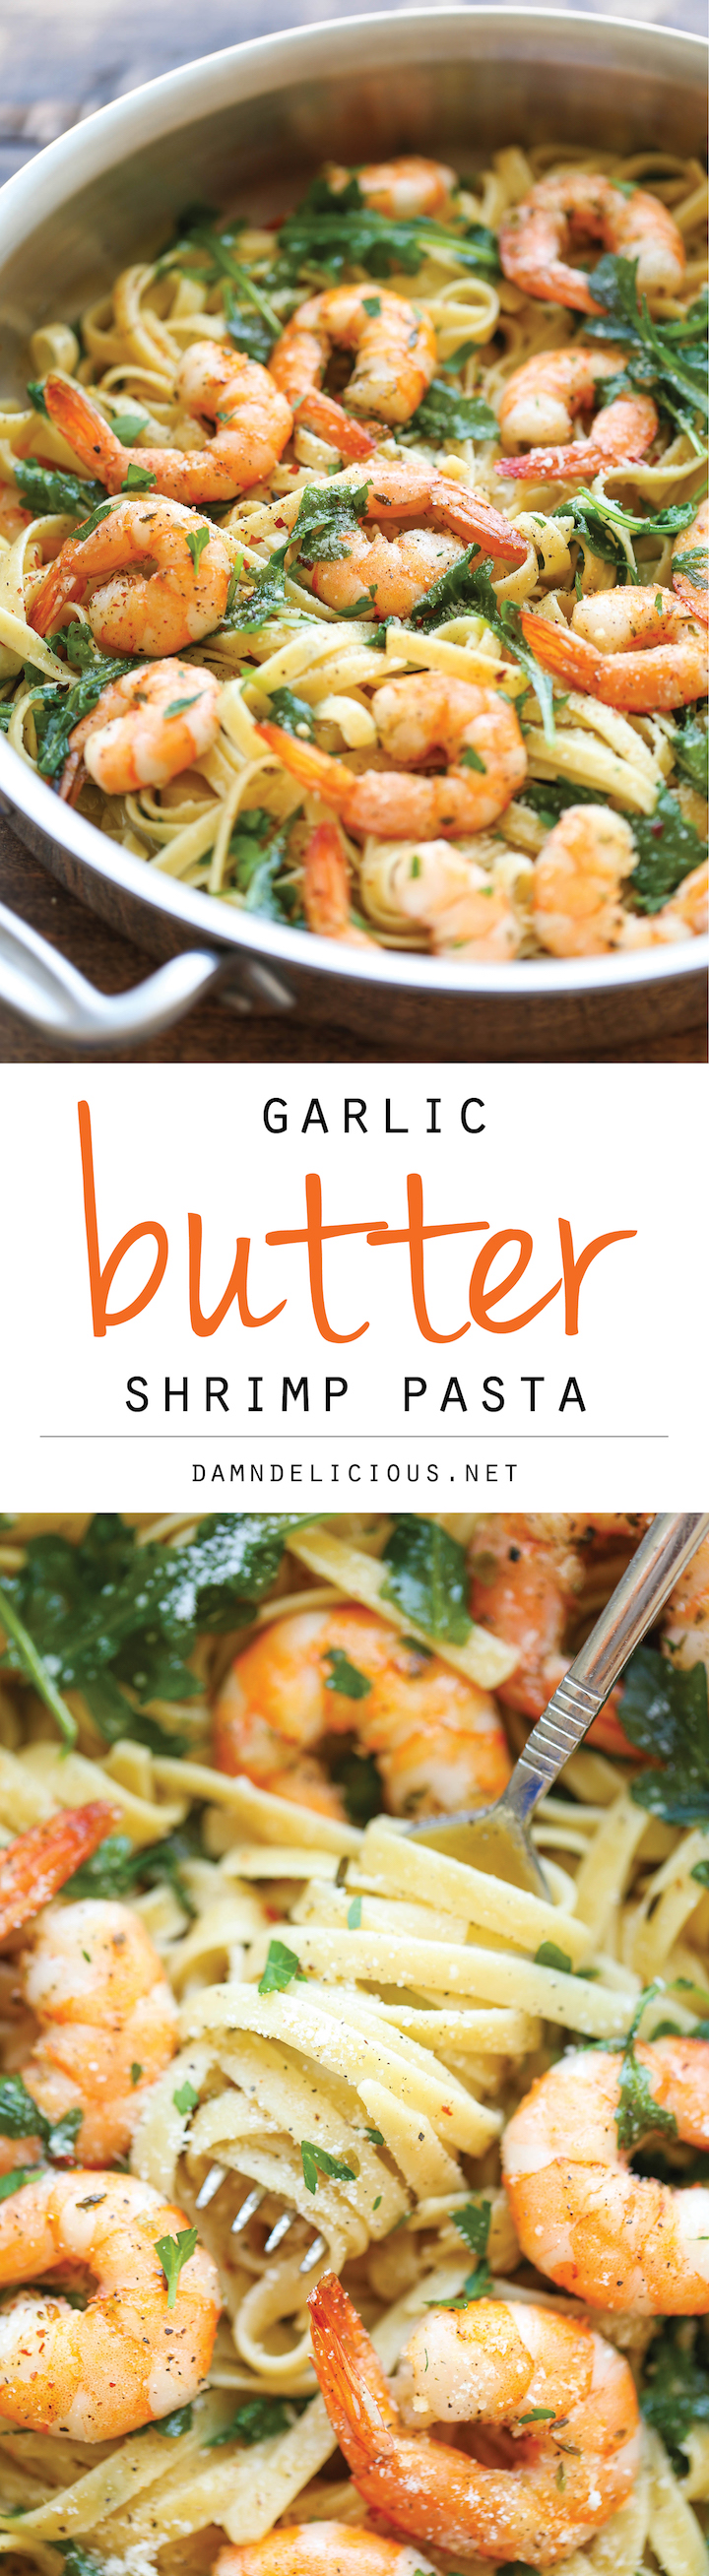 Garlic Butter Shrimp Pasta - An easy peasy pasta dish that's simple, flavorful and hearty. And all you need is 20 min to whip this up!